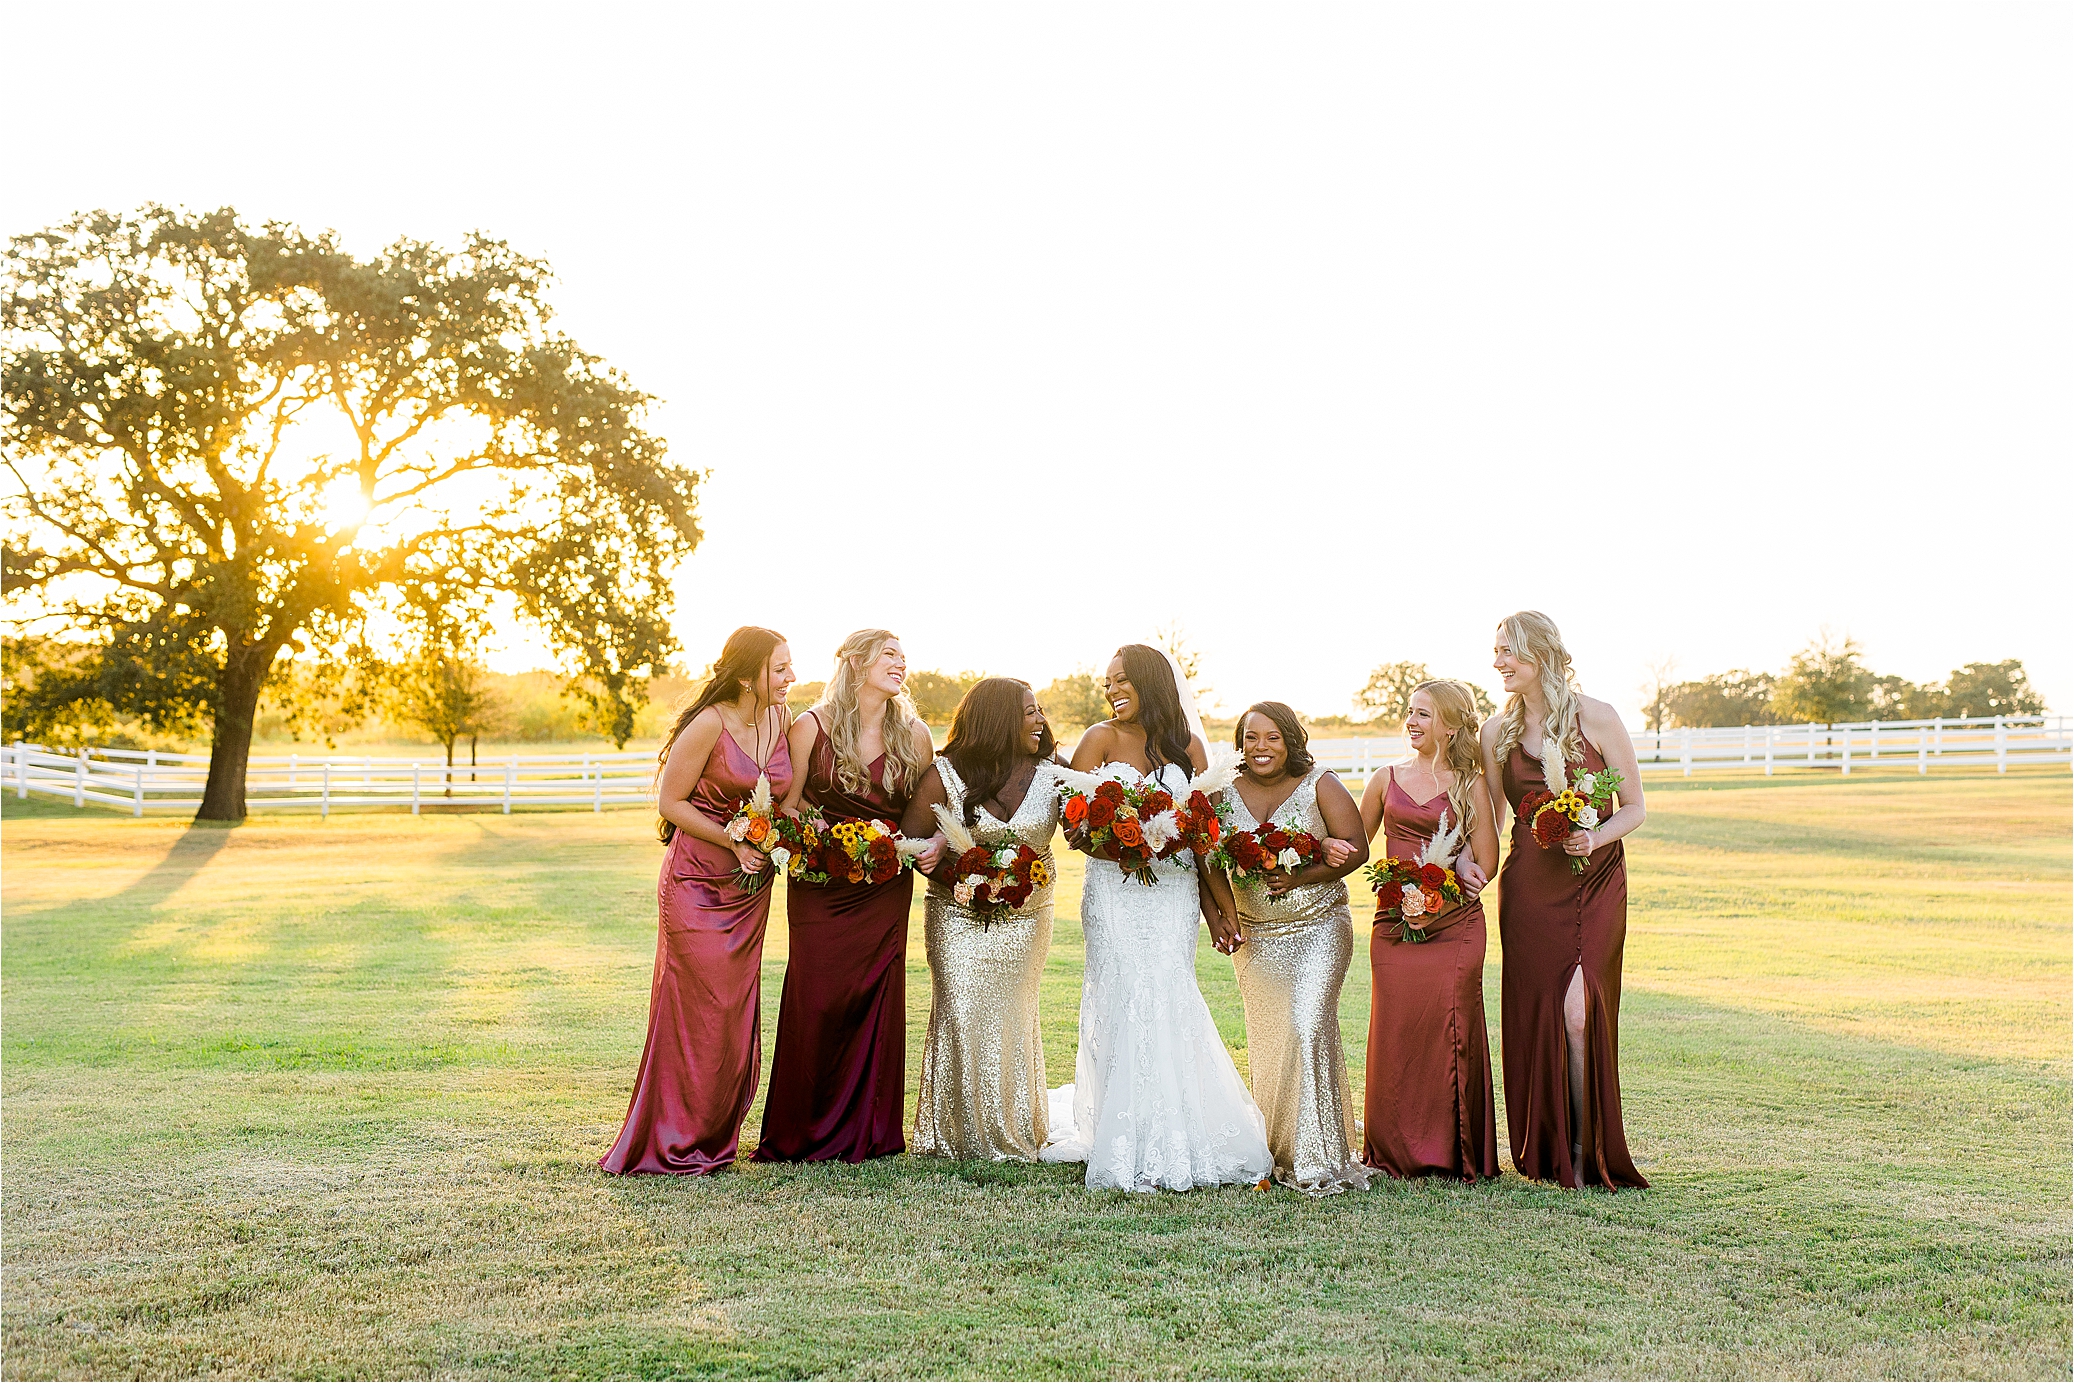 A bride and her bridesmaids walk with sunset behind them at The Milestone by Boerne Wedding Photographer Jillian Hogan 